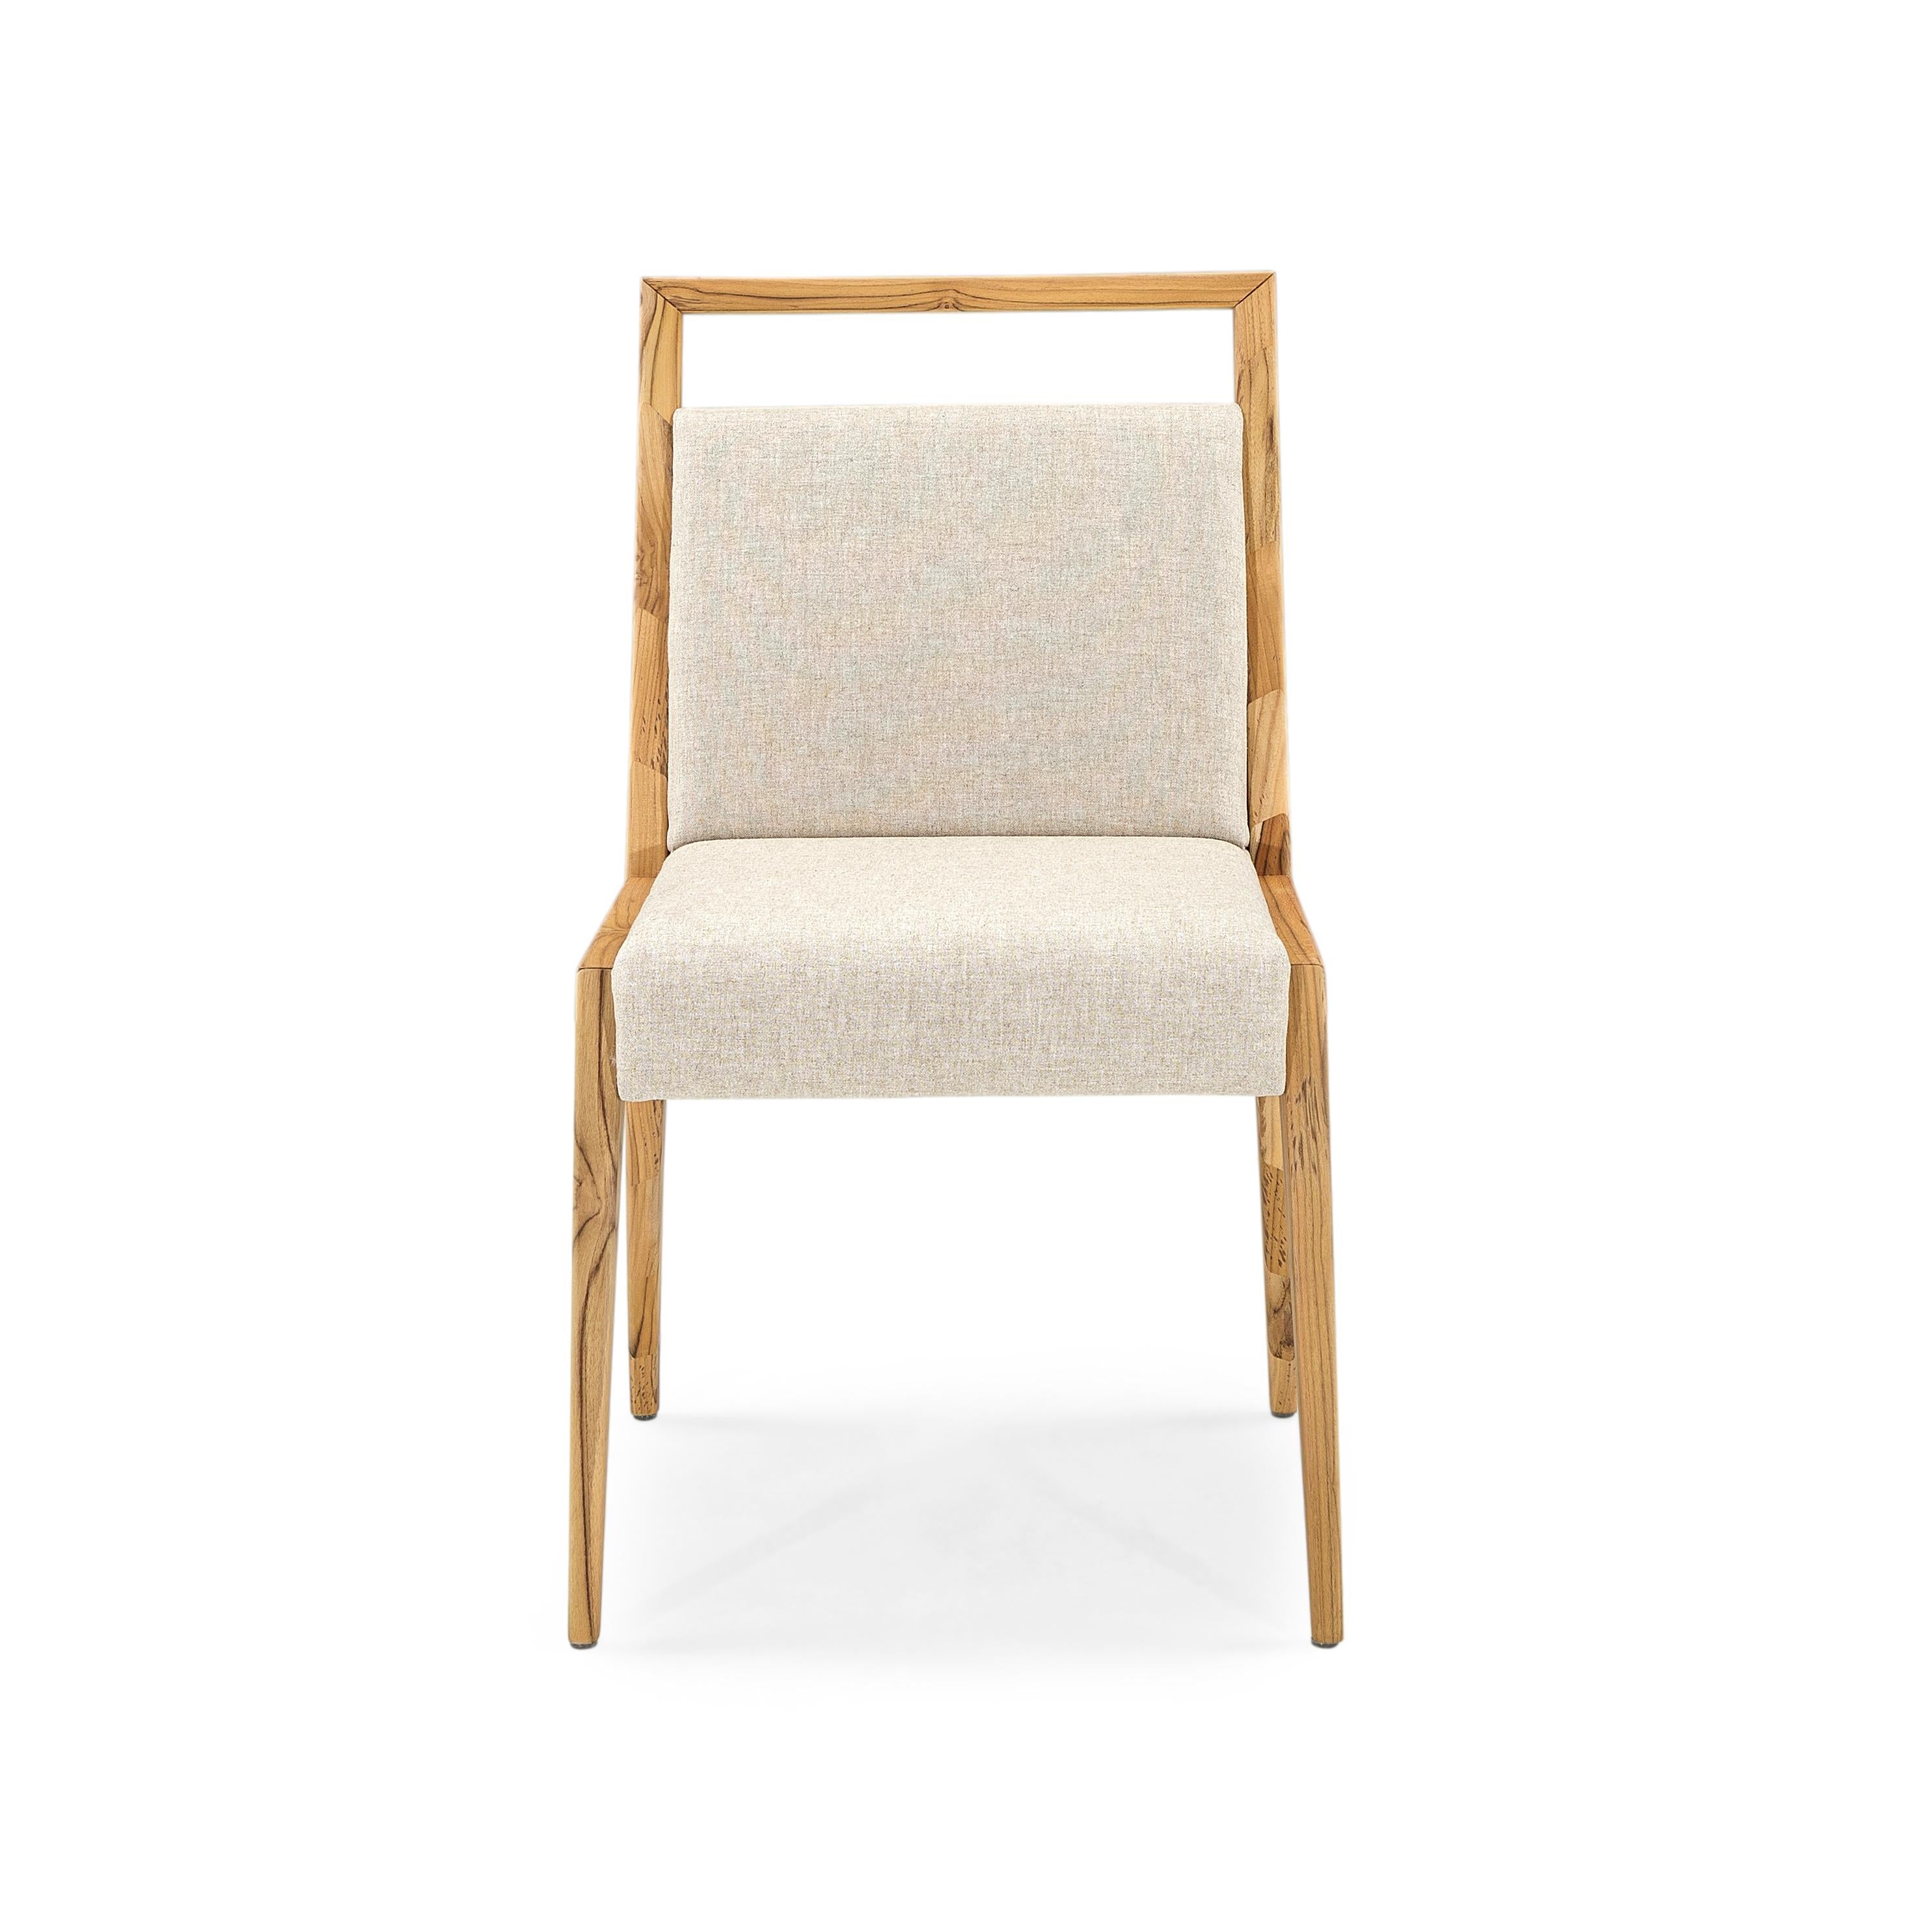 Sotto Dining Chair with a Teak Wood Finish and Beige Fabric, set of 2 For Sale 2